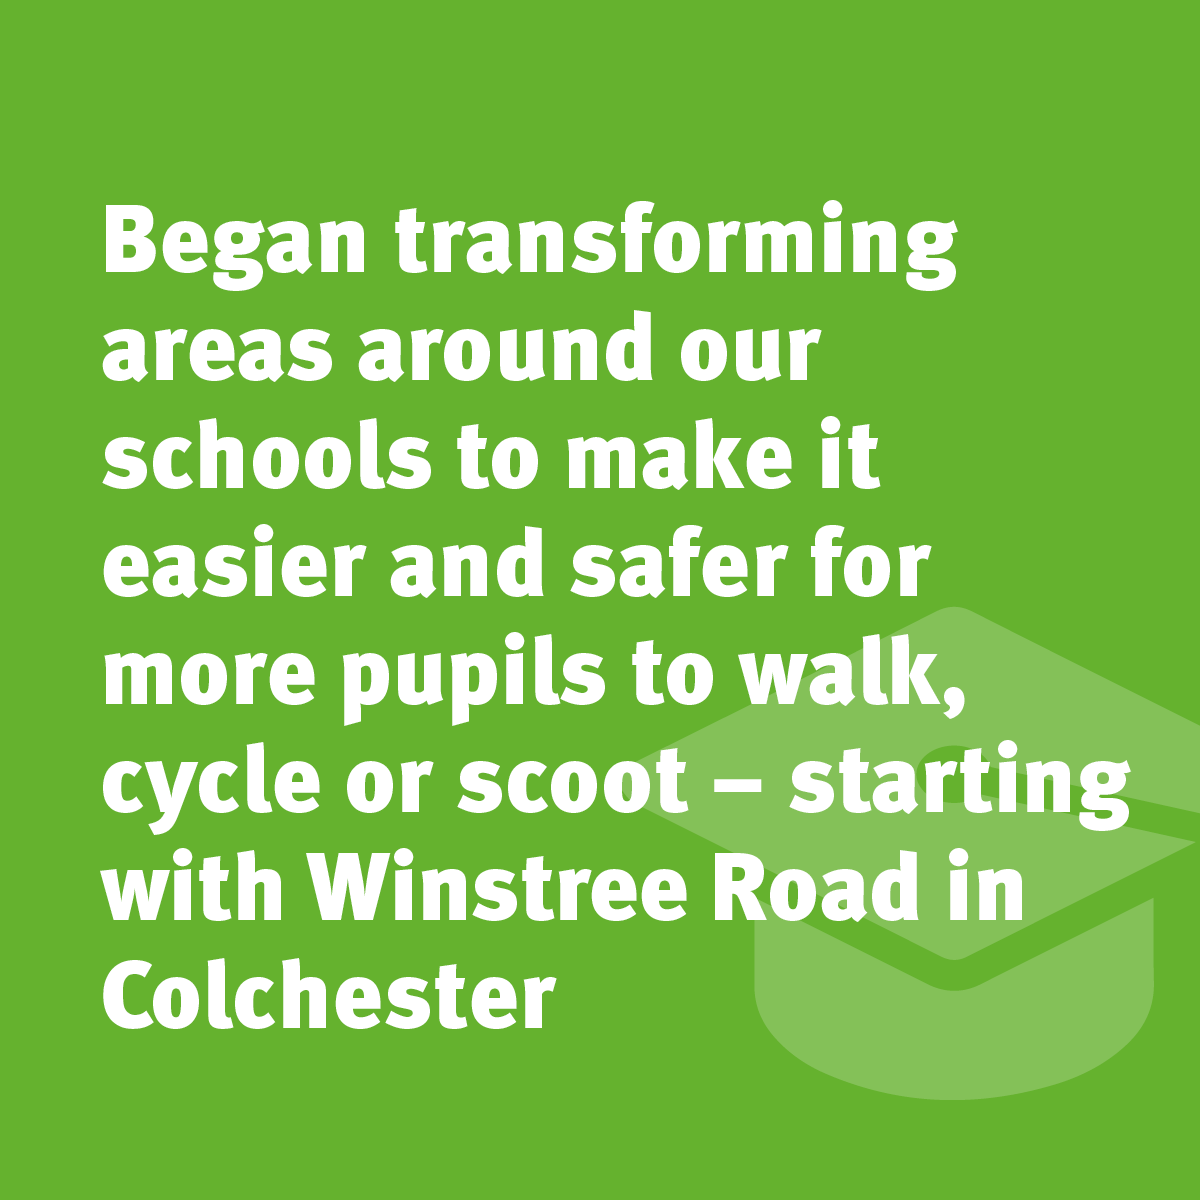 Began transforming areas around our schools to make easier and safer for more pupils to walk, cycle or scoot - starting with Winstree Road in Colchester